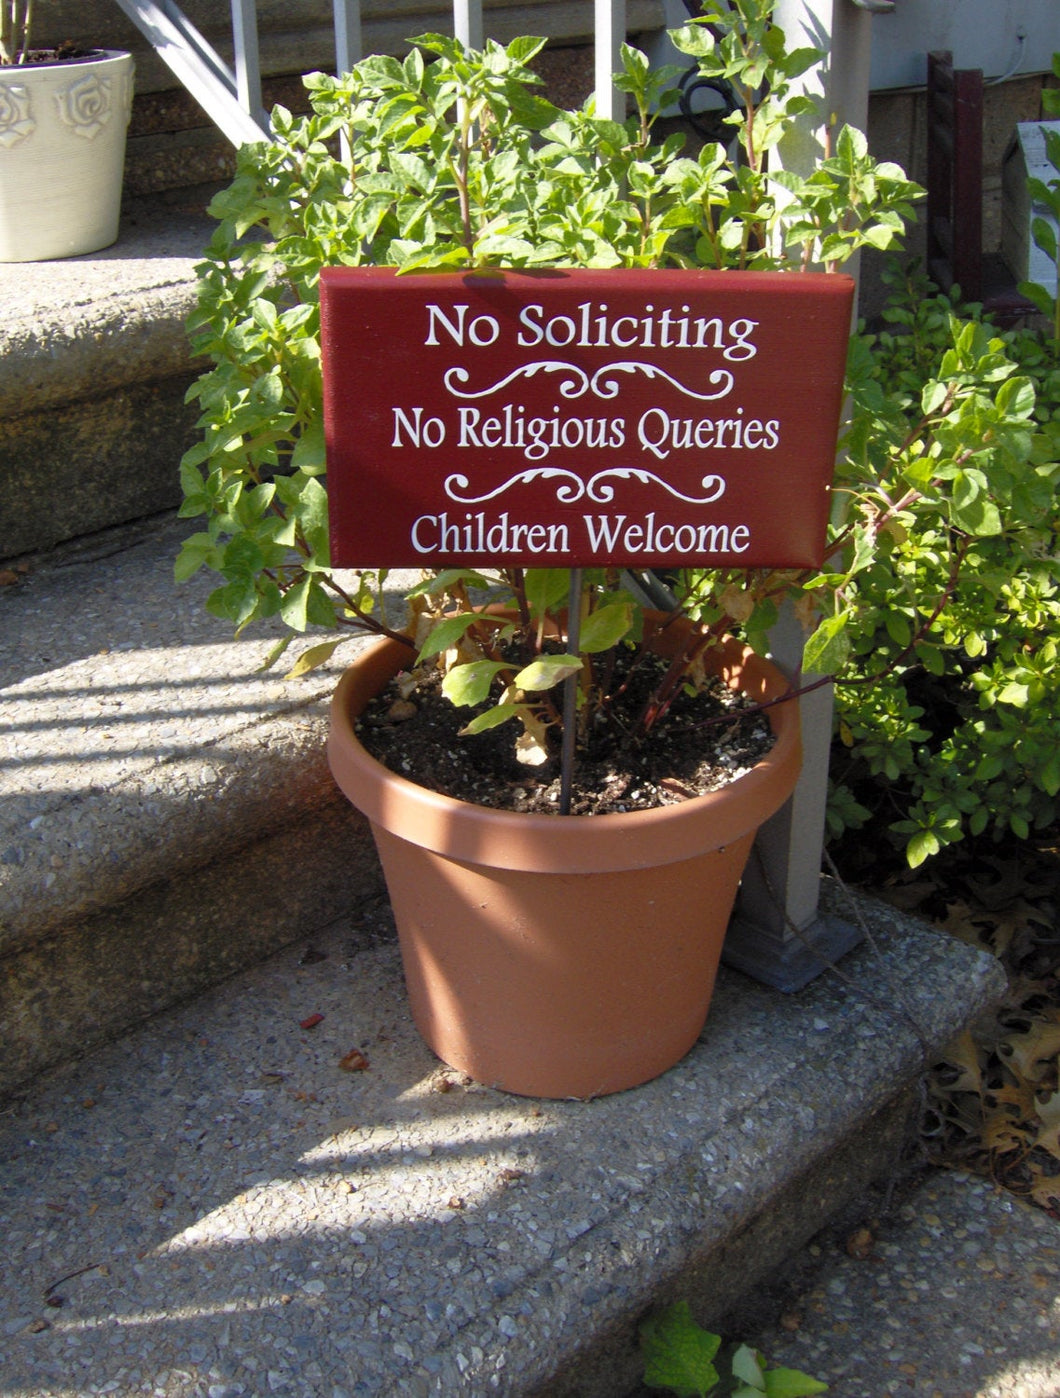 Signs No Soliciting Outdoor Sign No Religious Queries Children Welcome rustic red or black yard sign on a stake.  Let unwanted guests know you are not interested but welcome neighbors kid fundraising.  